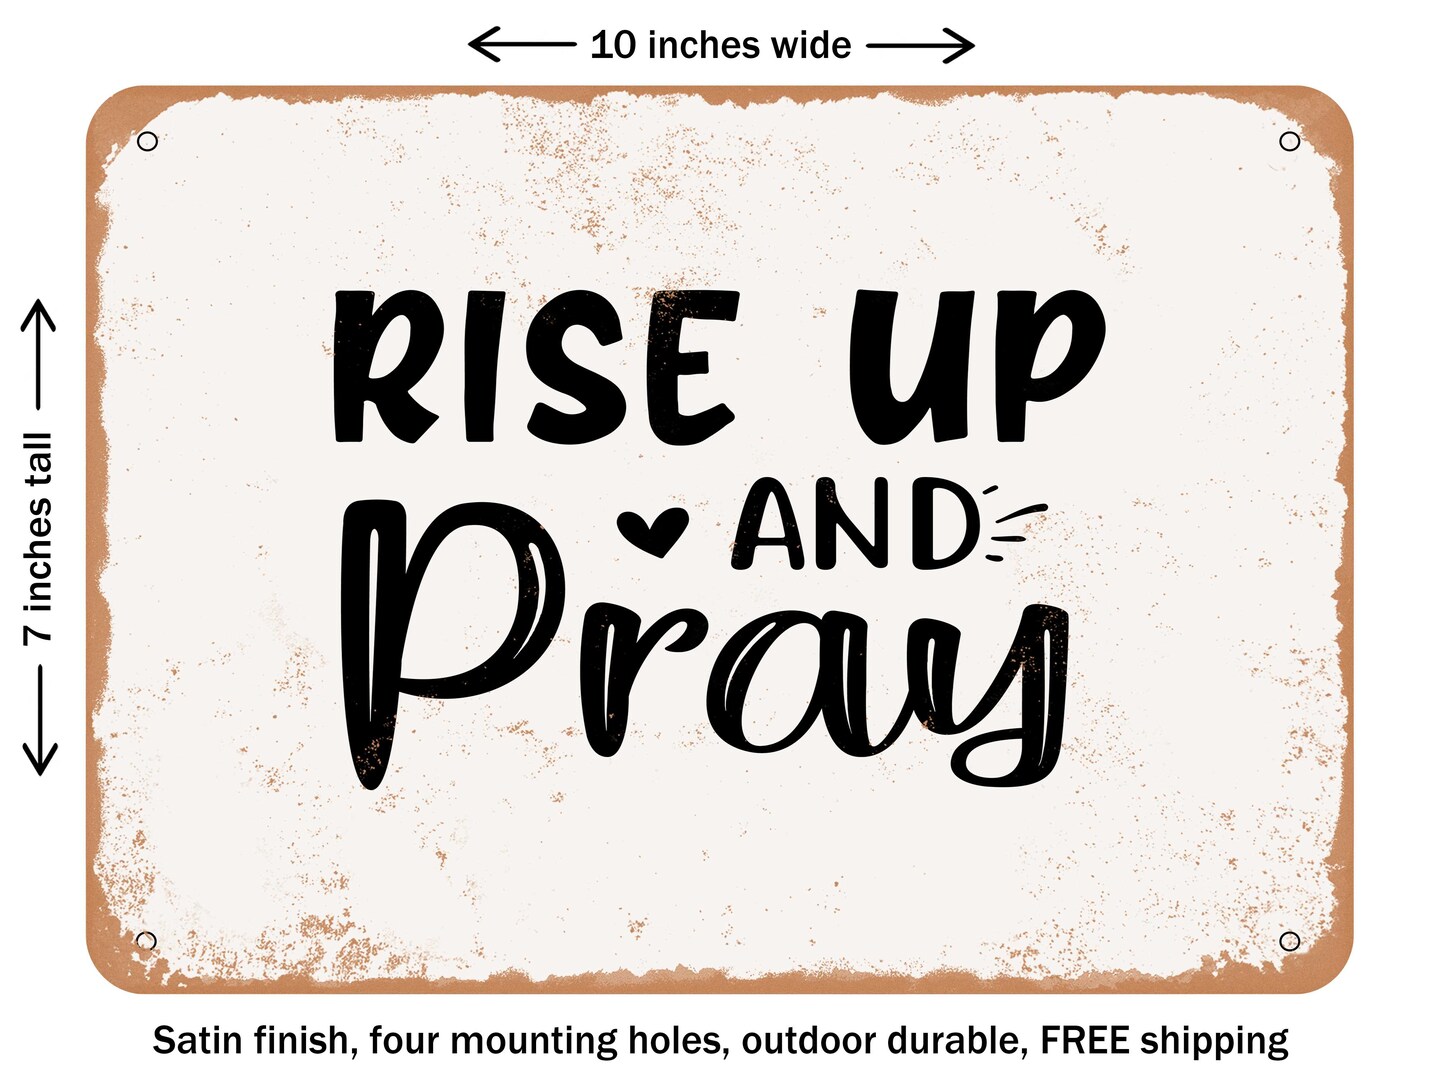 DECORATIVE METAL SIGN - Rise Up and Pray - 2 - Vintage Rusty Look